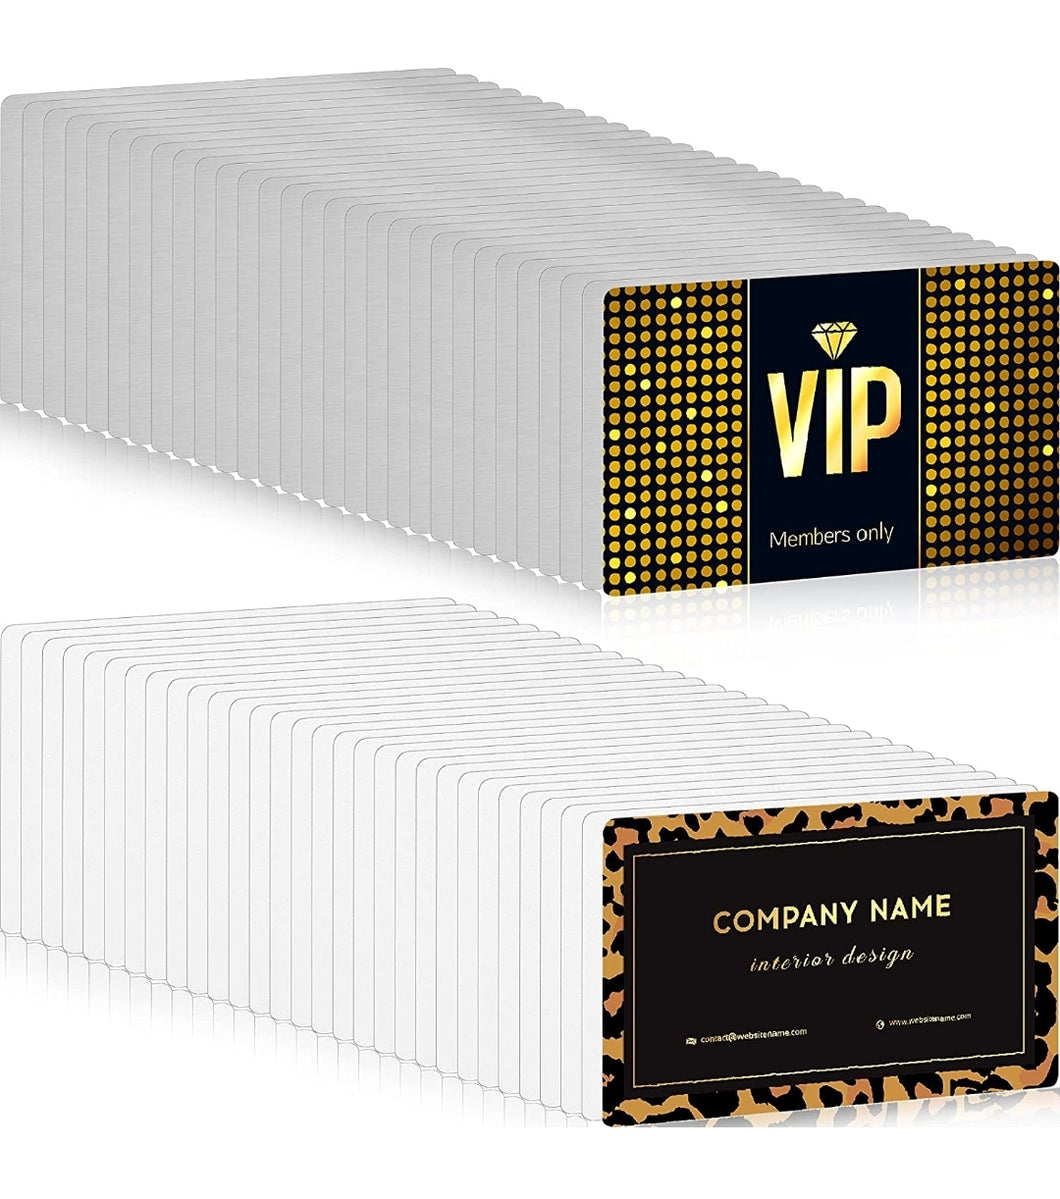 Sublimation Metal Business Card Blanks – One to a Ton Wholesale by Younik